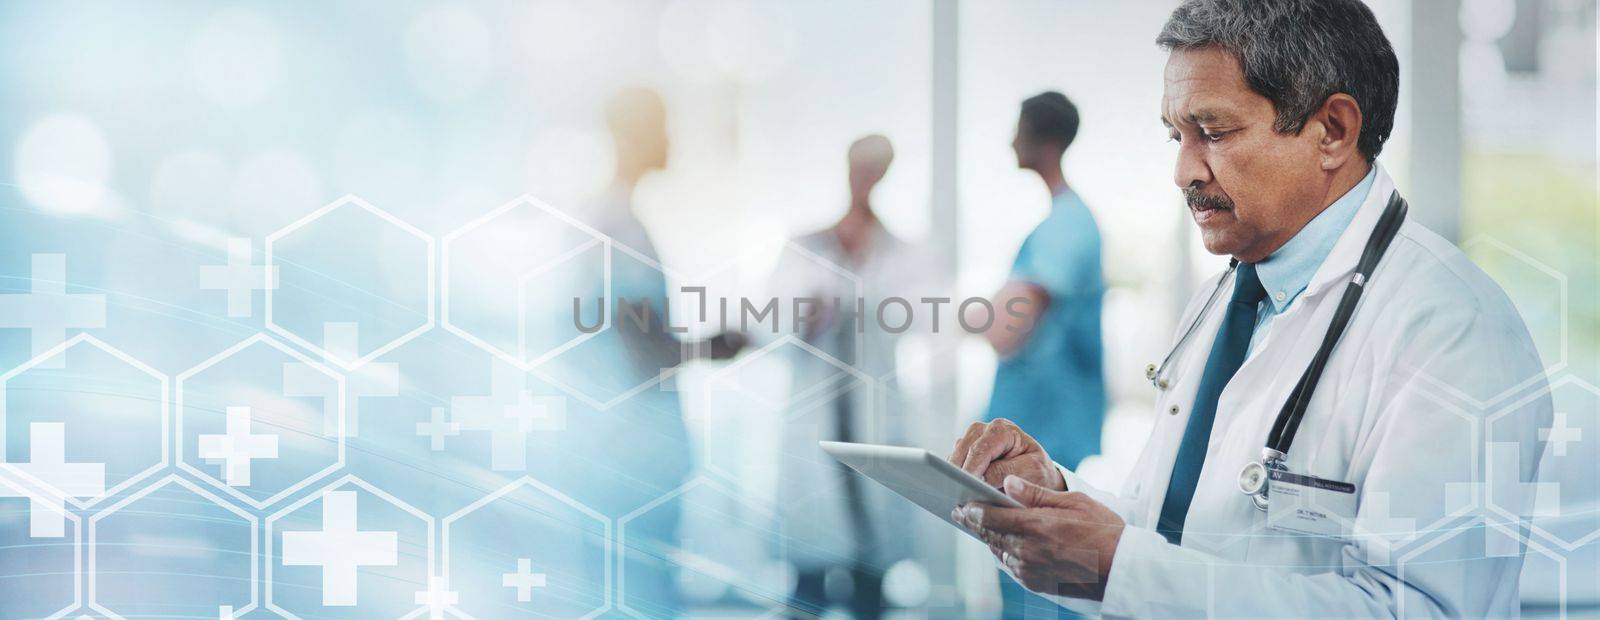 Health in doctor, tablet and technology transformation overlay, digital healthcare system and online medical info. Hospital data, senior physician in medicine mockup, tech innovation and research.